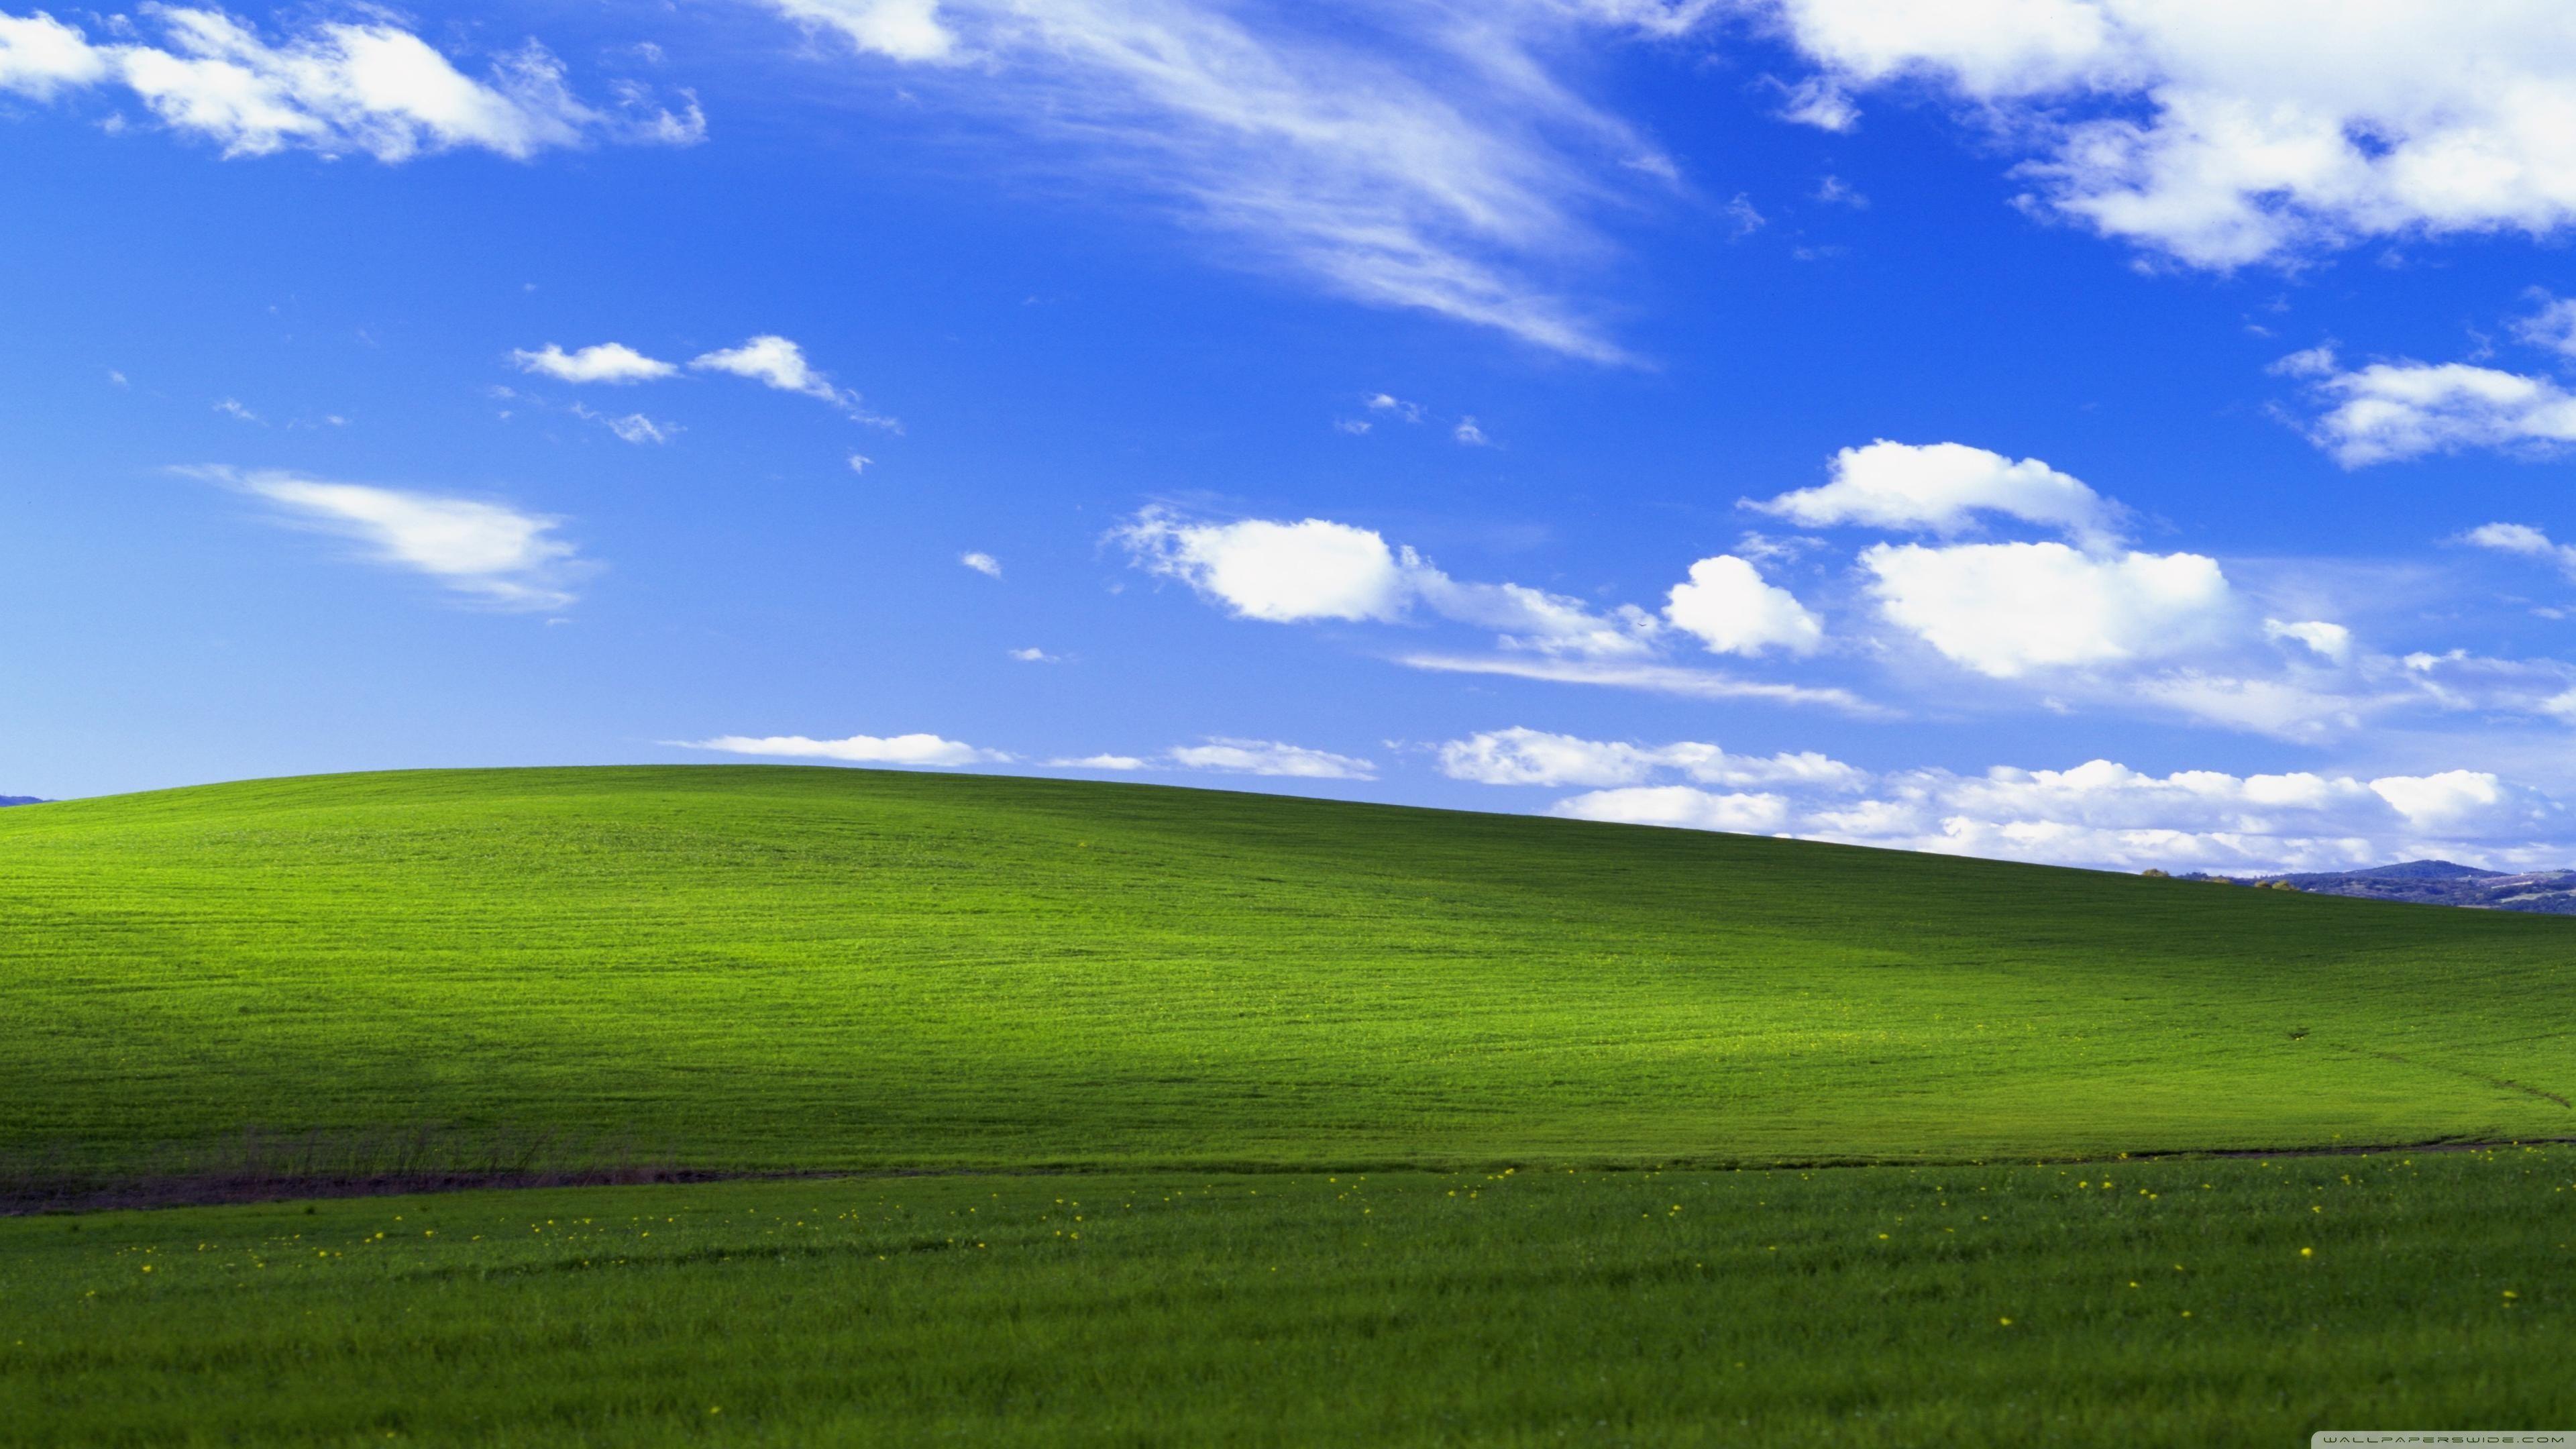 Setting the Default Windows Wallpaper during OS Deployment